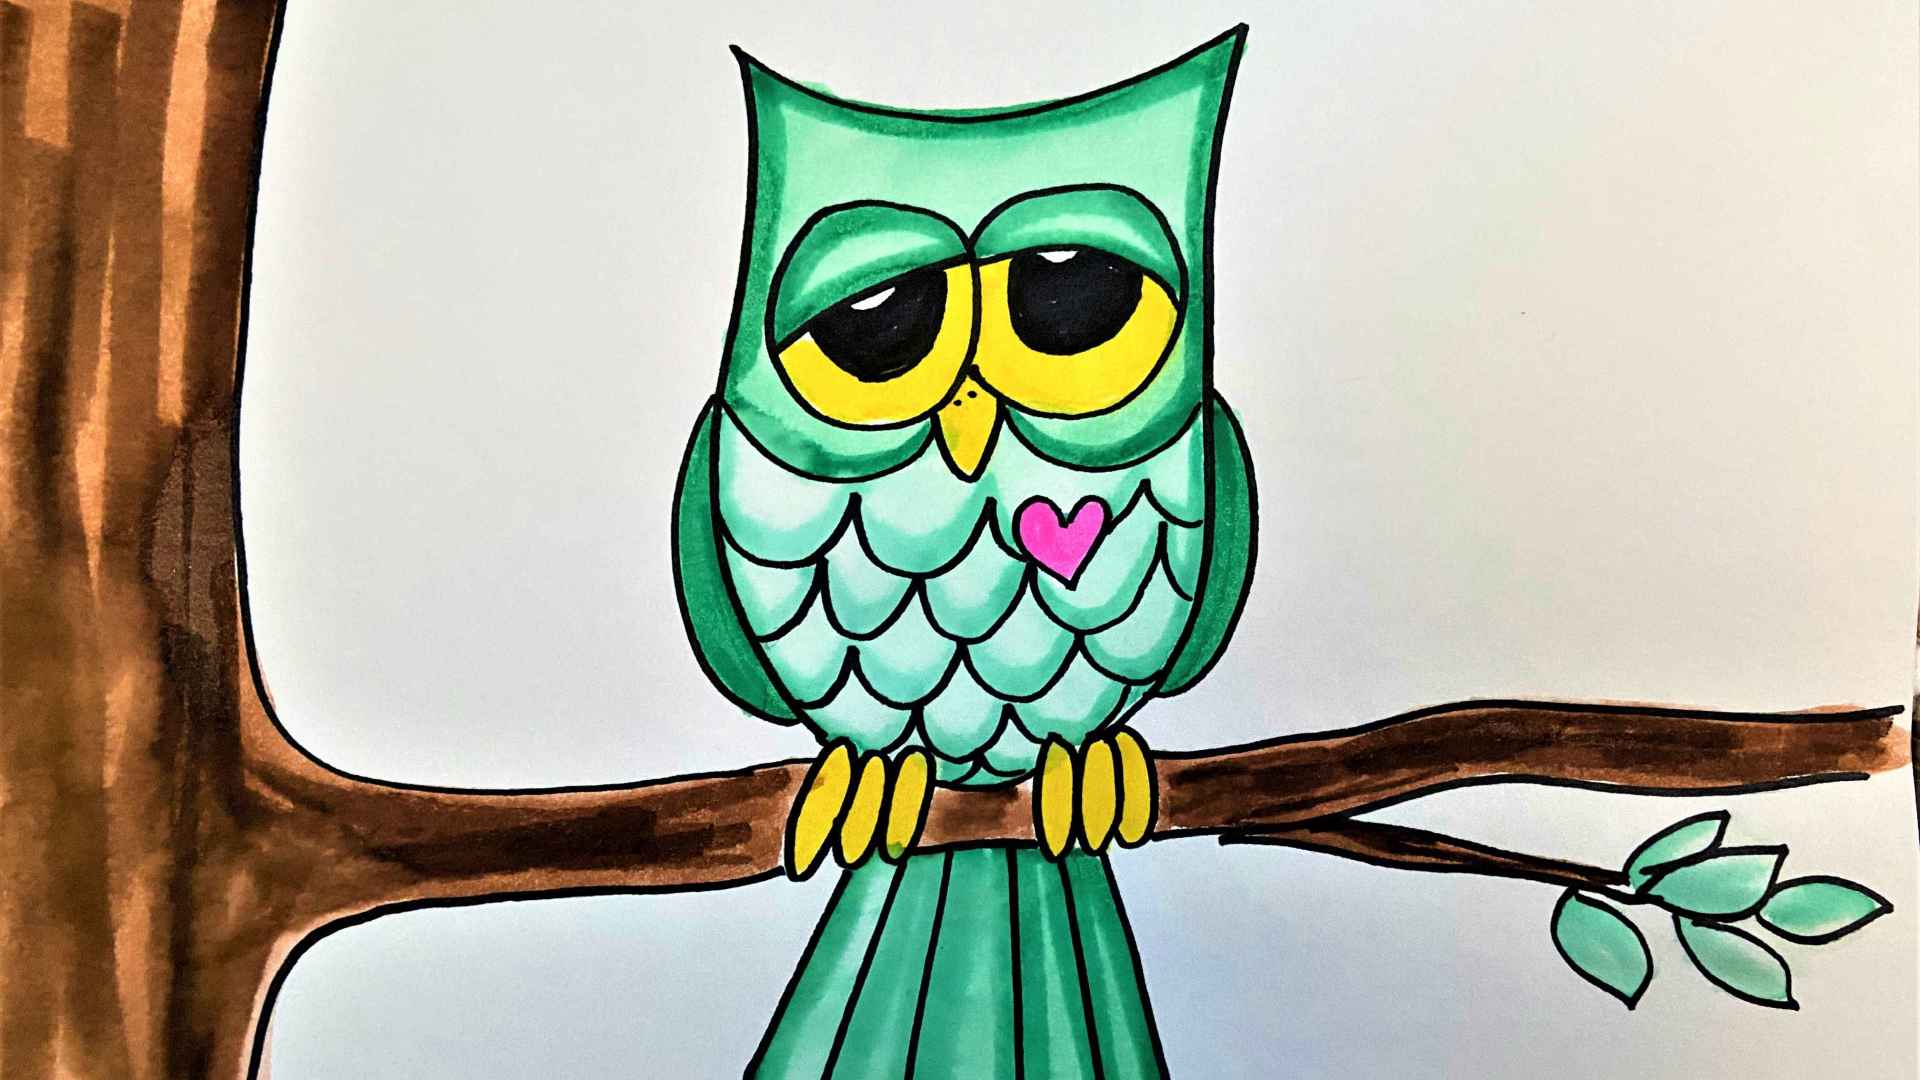 How to draw an Owl step by step - Simple Owl drawing - Smart Kids 123